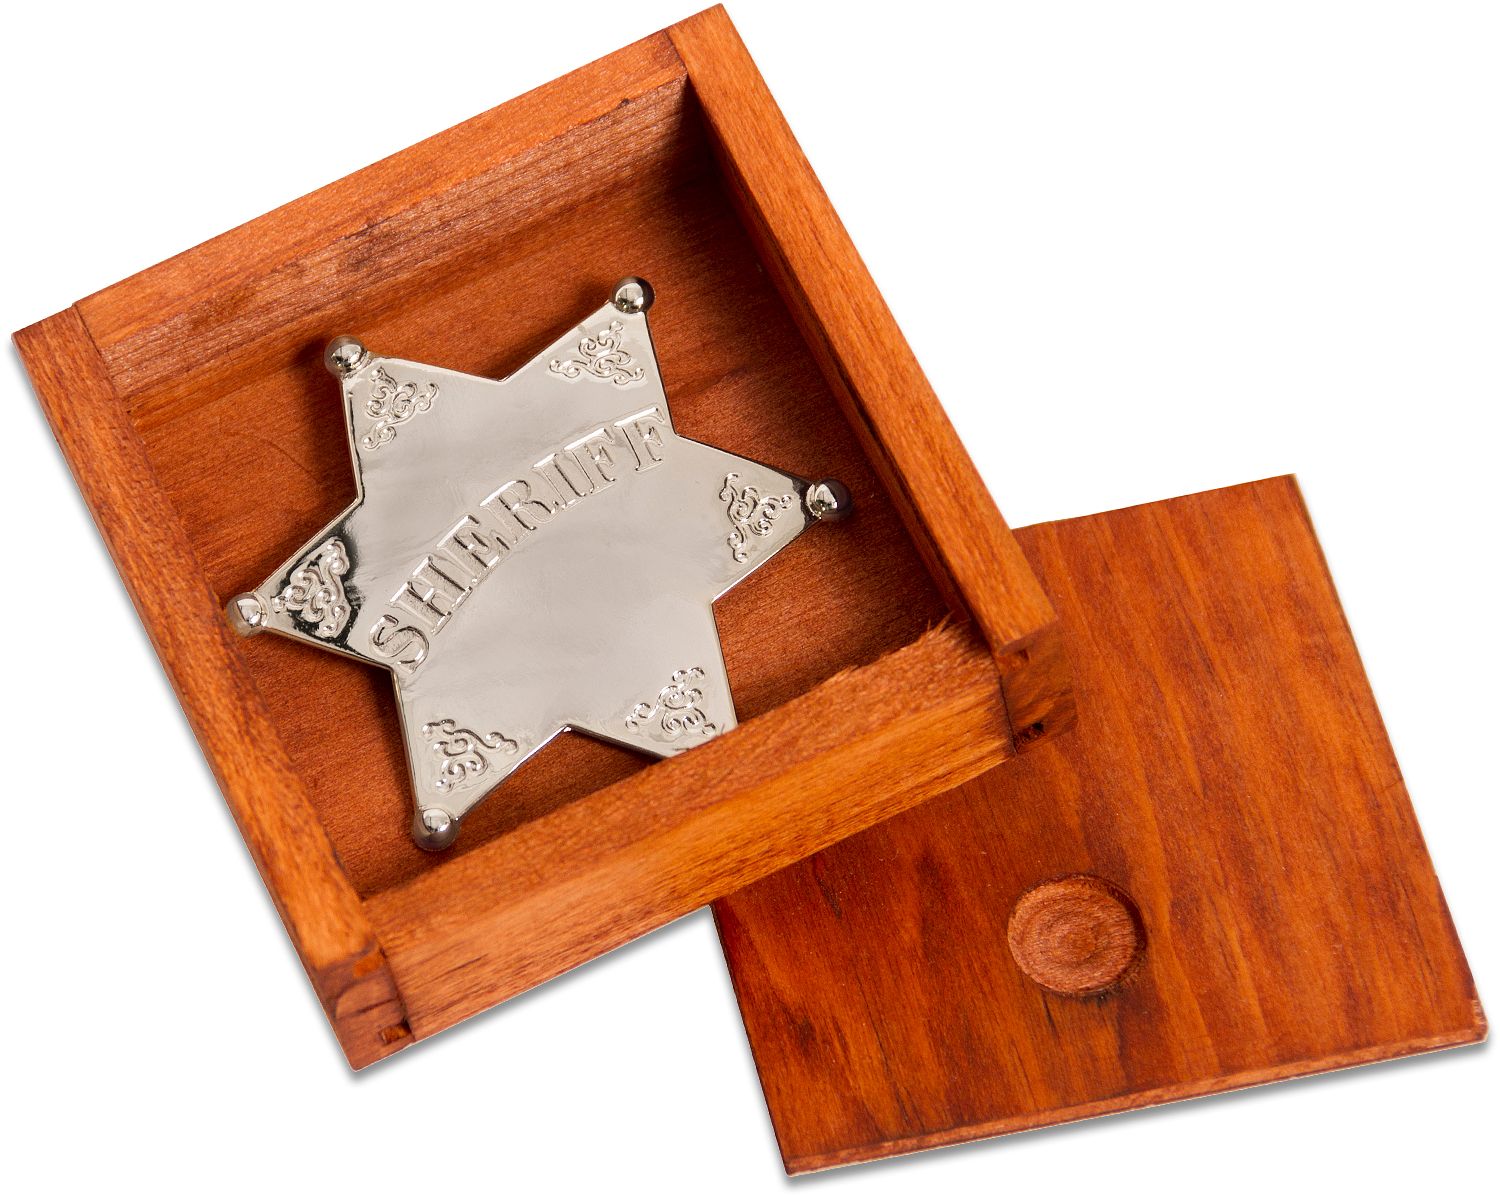 Denix Replica Sheriff's Badge with Display Box, Silver Plated - KnifeCenter  - 9101